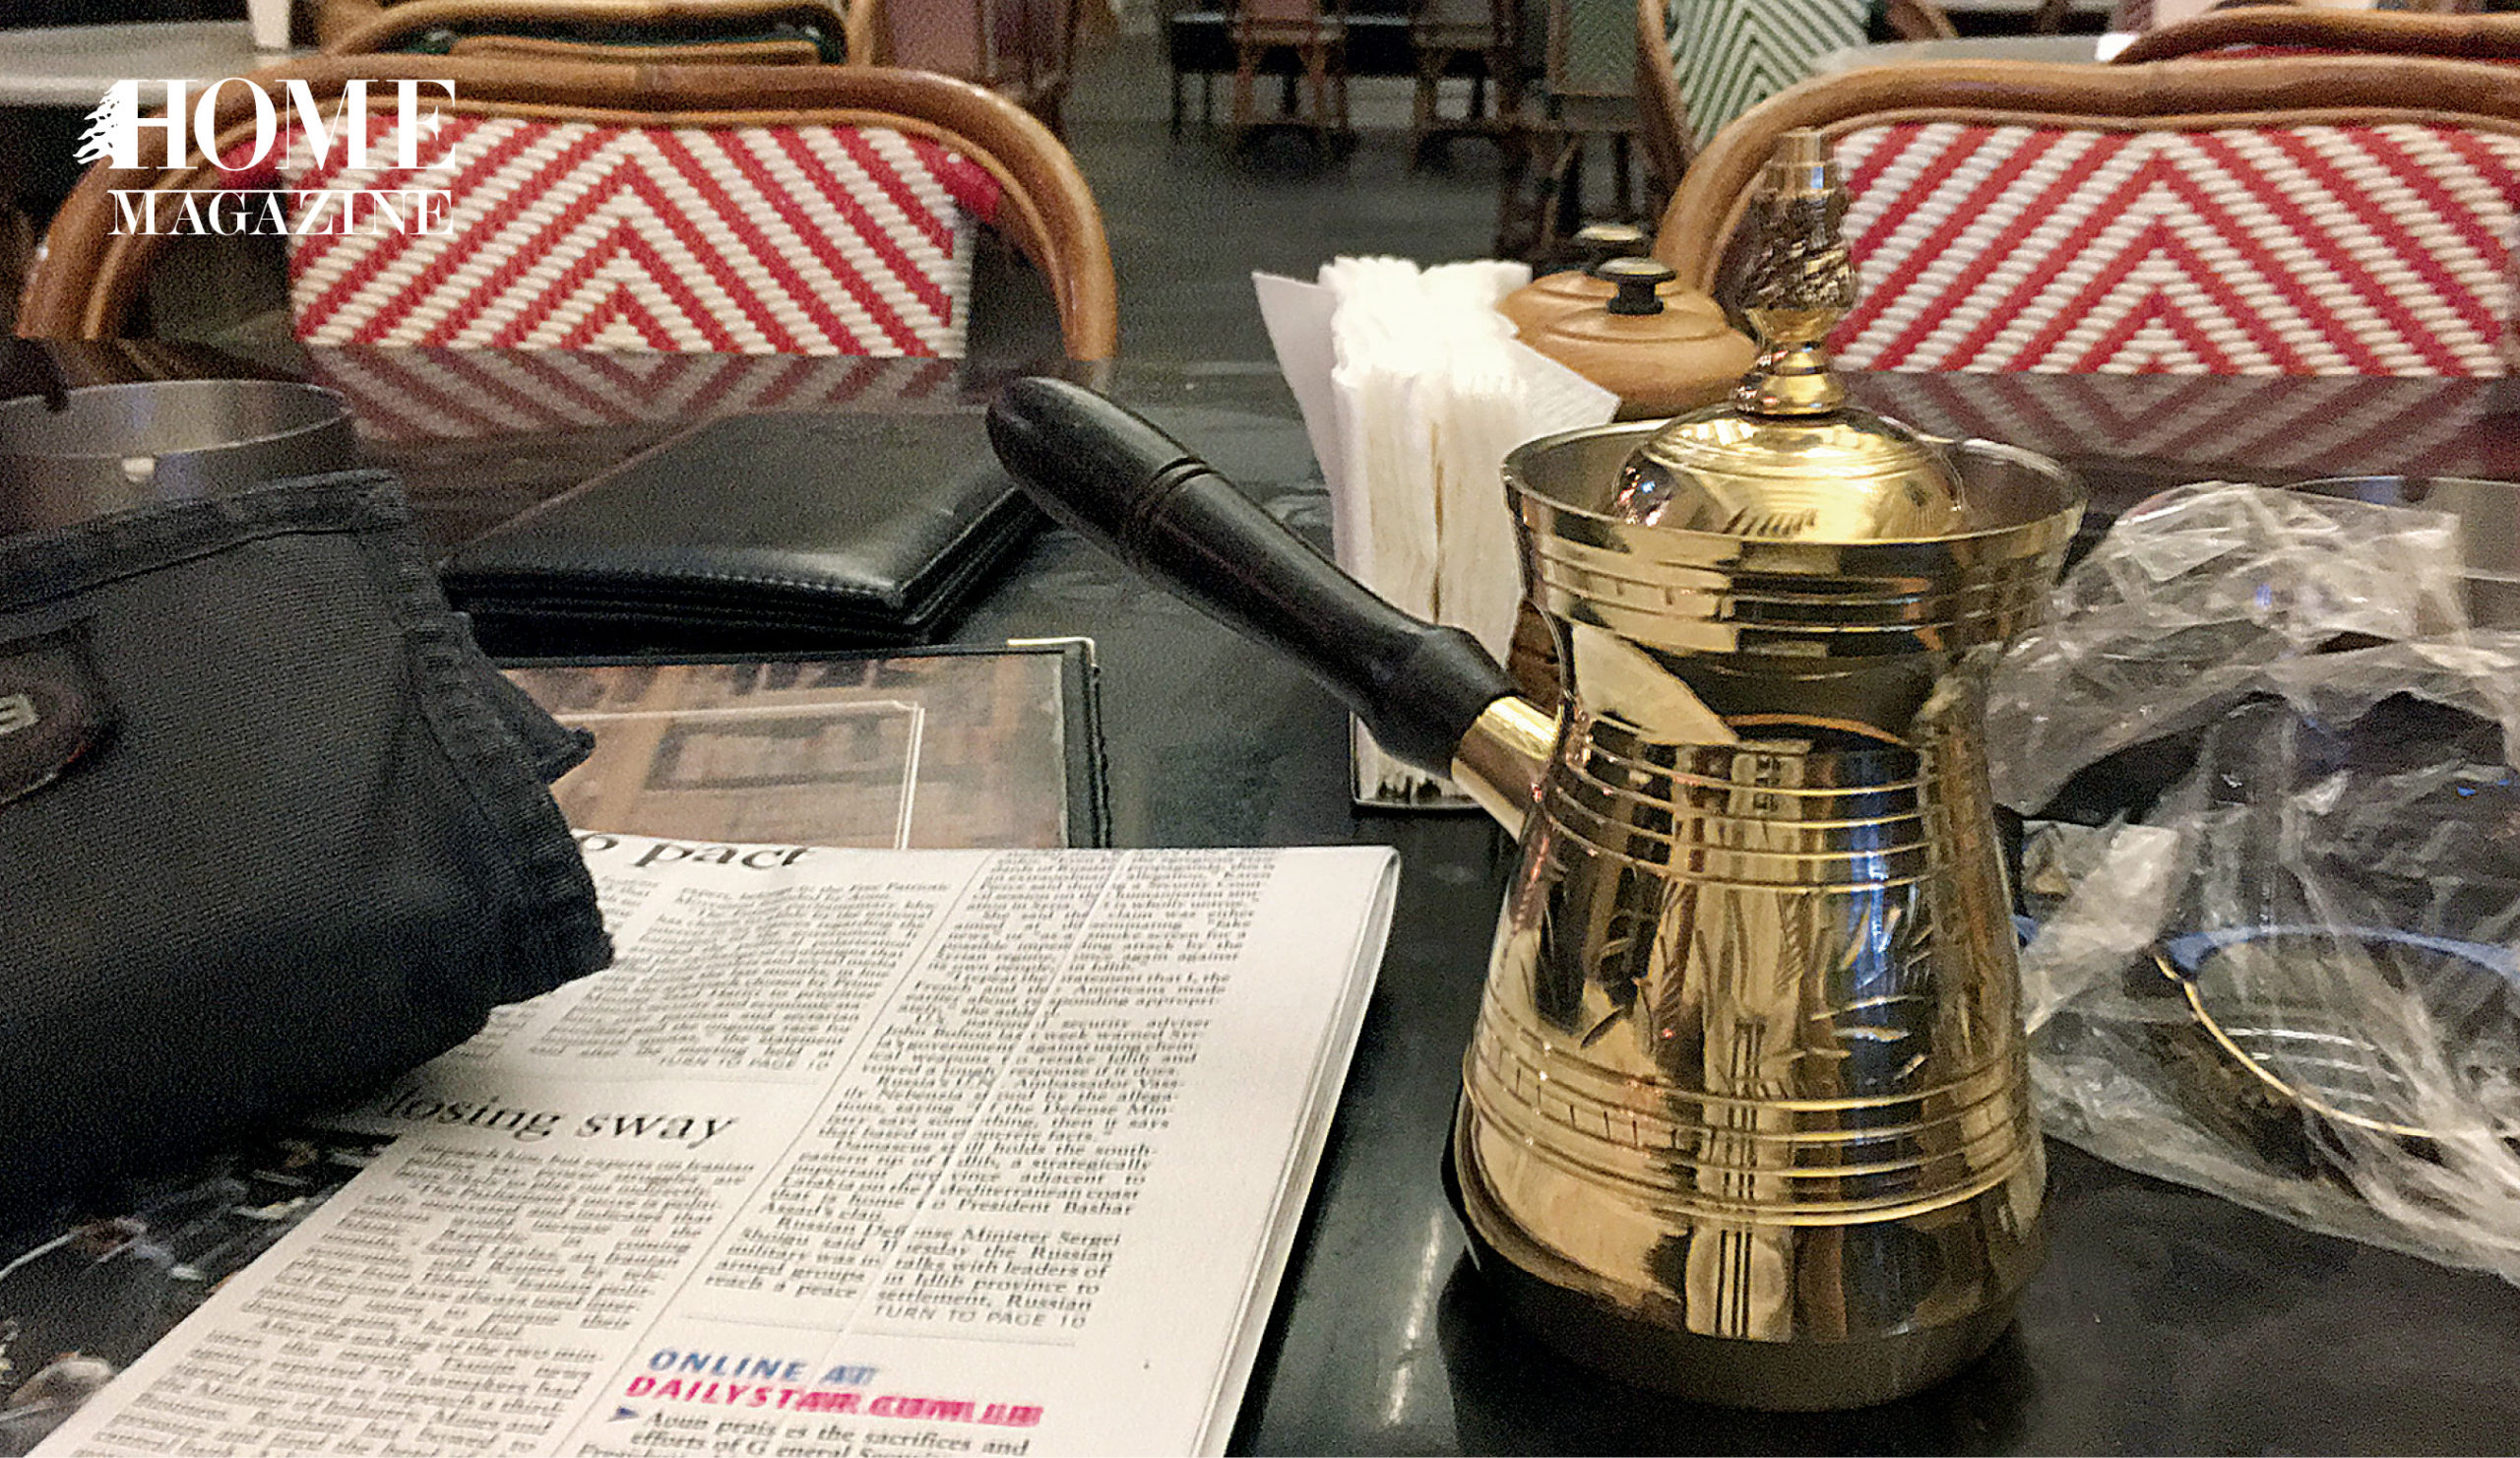 A newspaper, napkins and a coffee boiler on a table